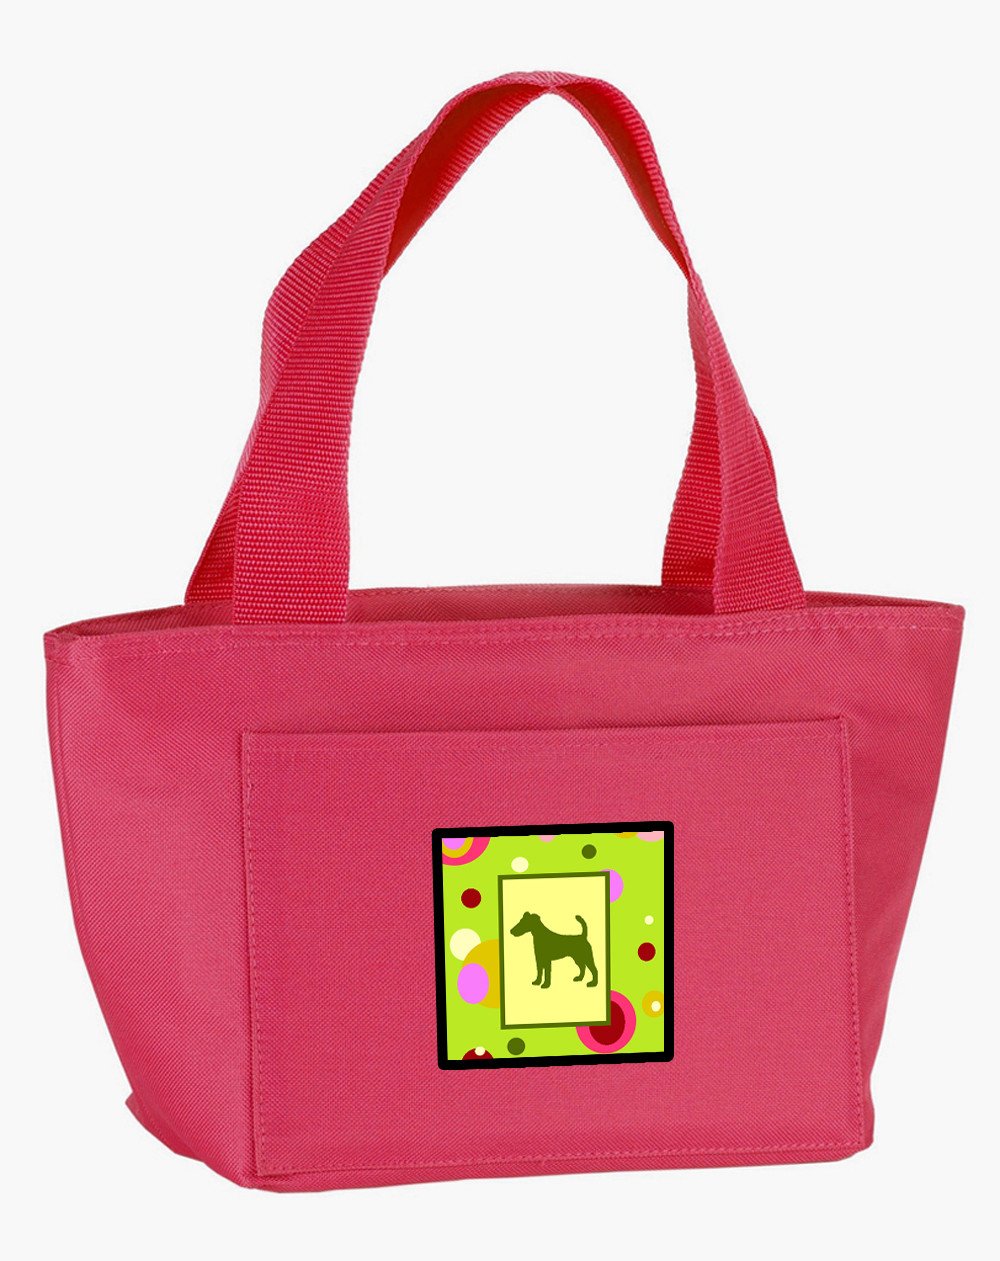 Lime Green Dots Fox Terrier Lunch Bag CK1058PK-8808 by Caroline's Treasures